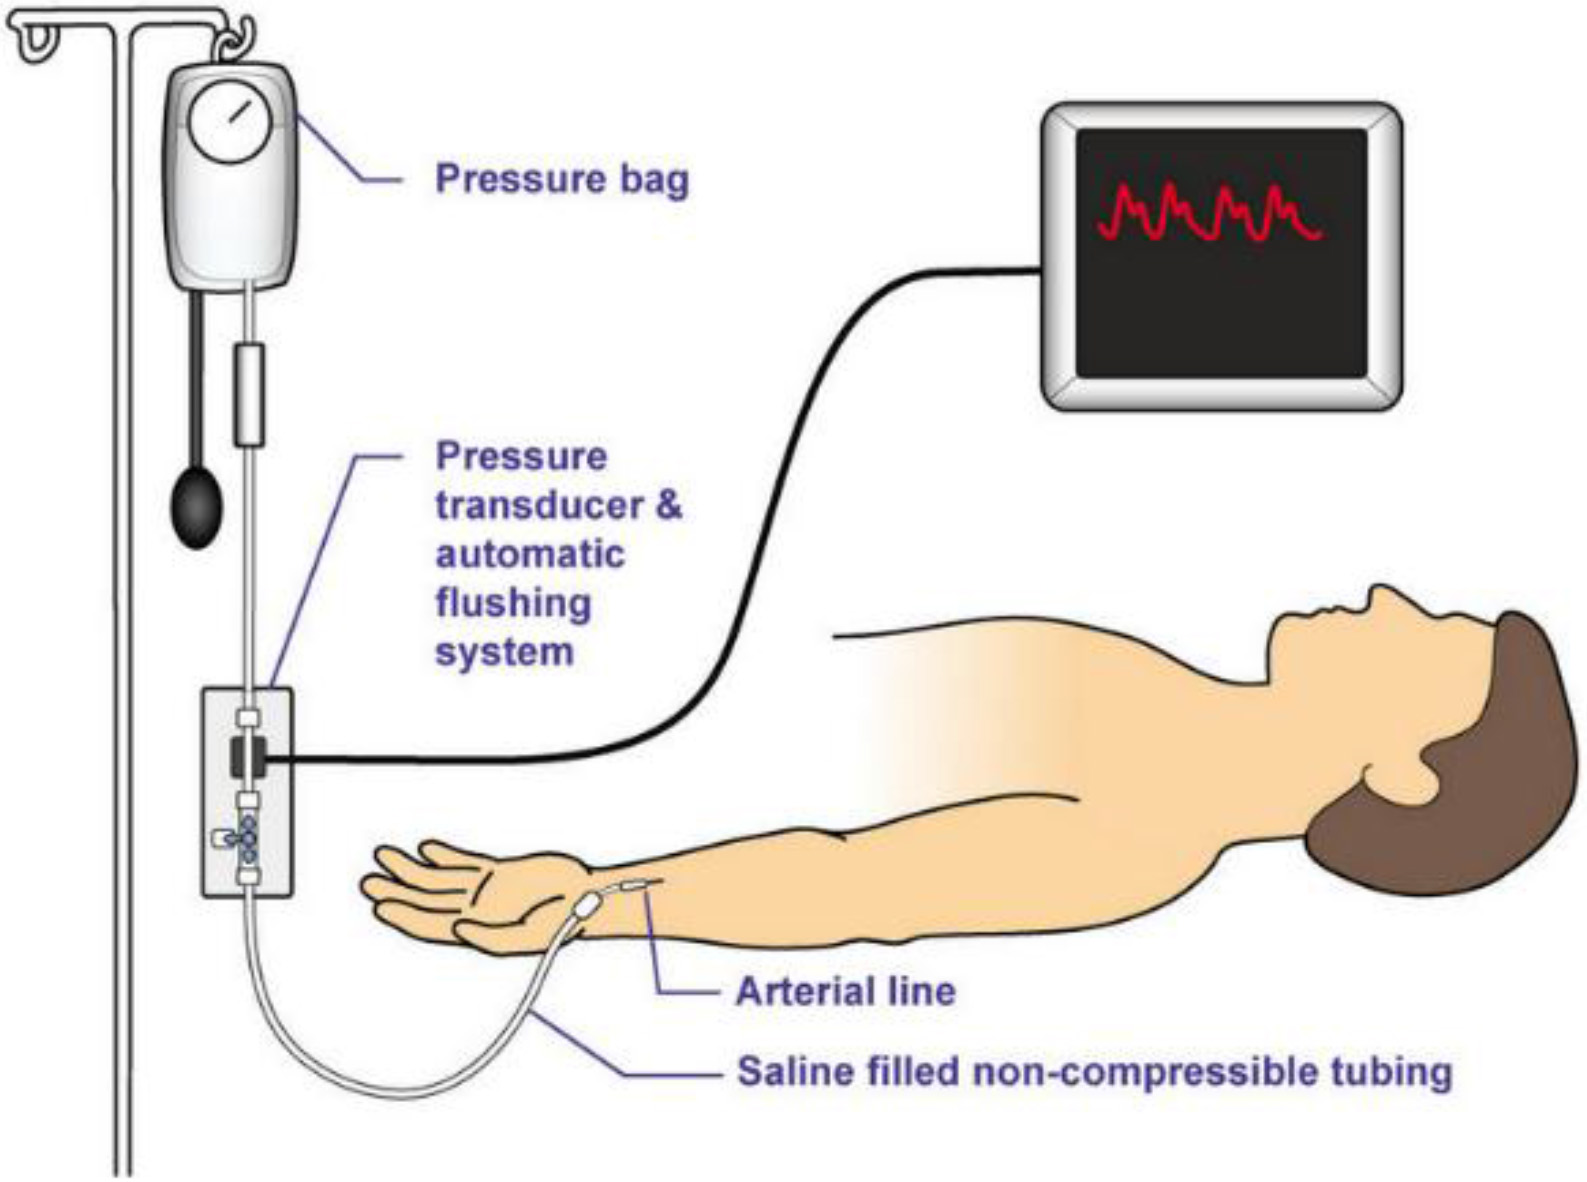 Components of an arterial monitoring system [6, 7].